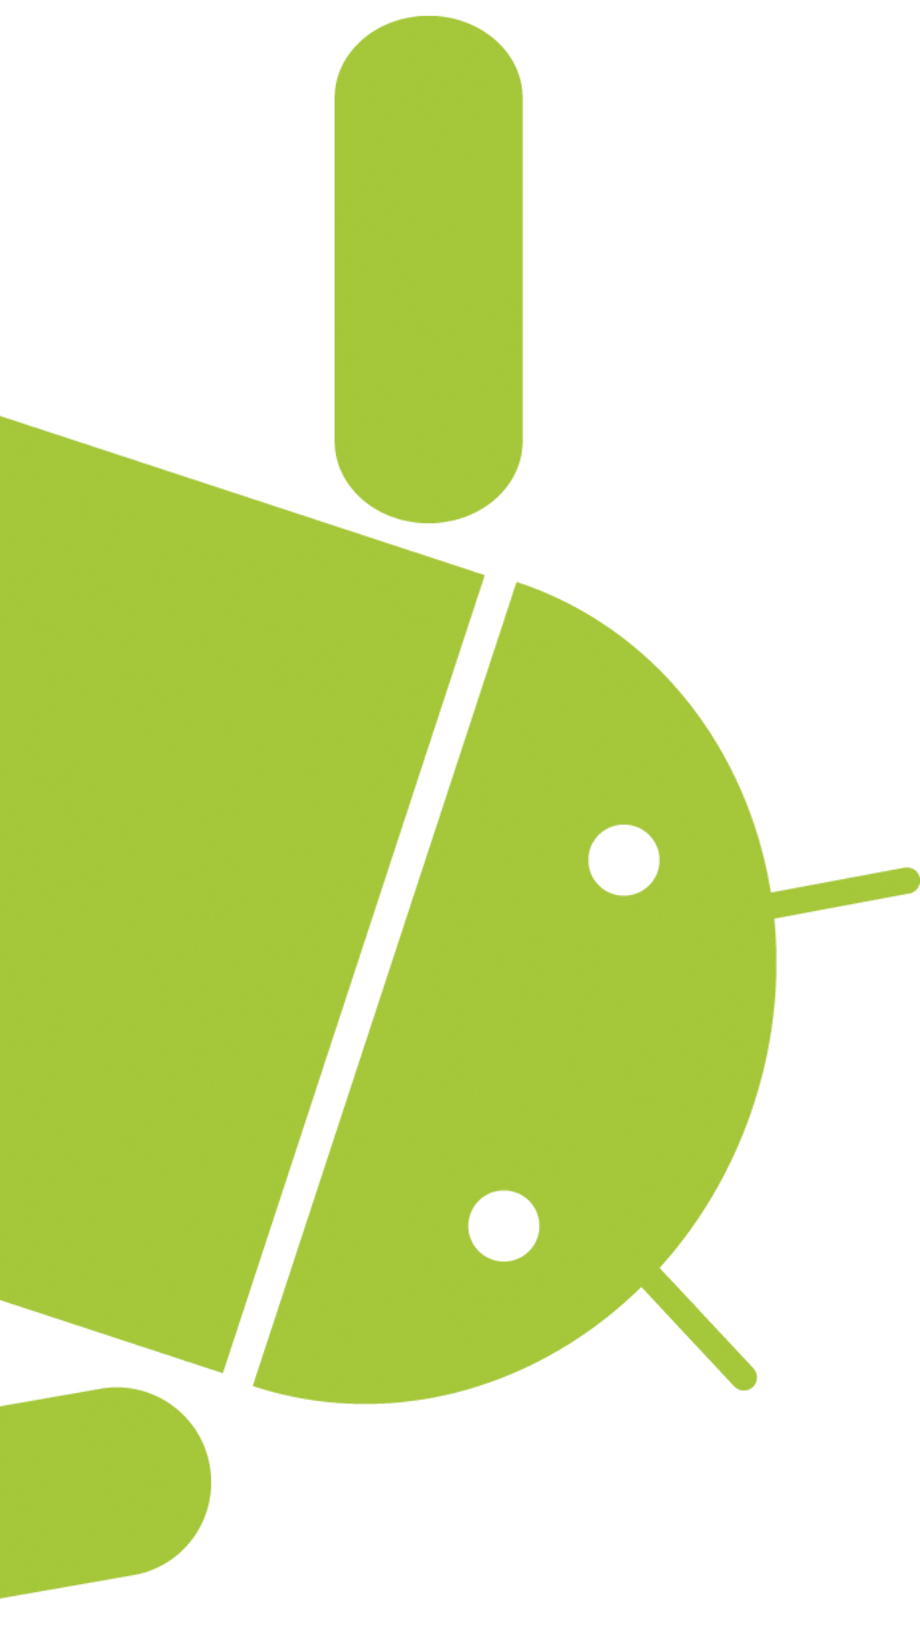 Download High Quality Transparent Logo Android Transparent Png Images